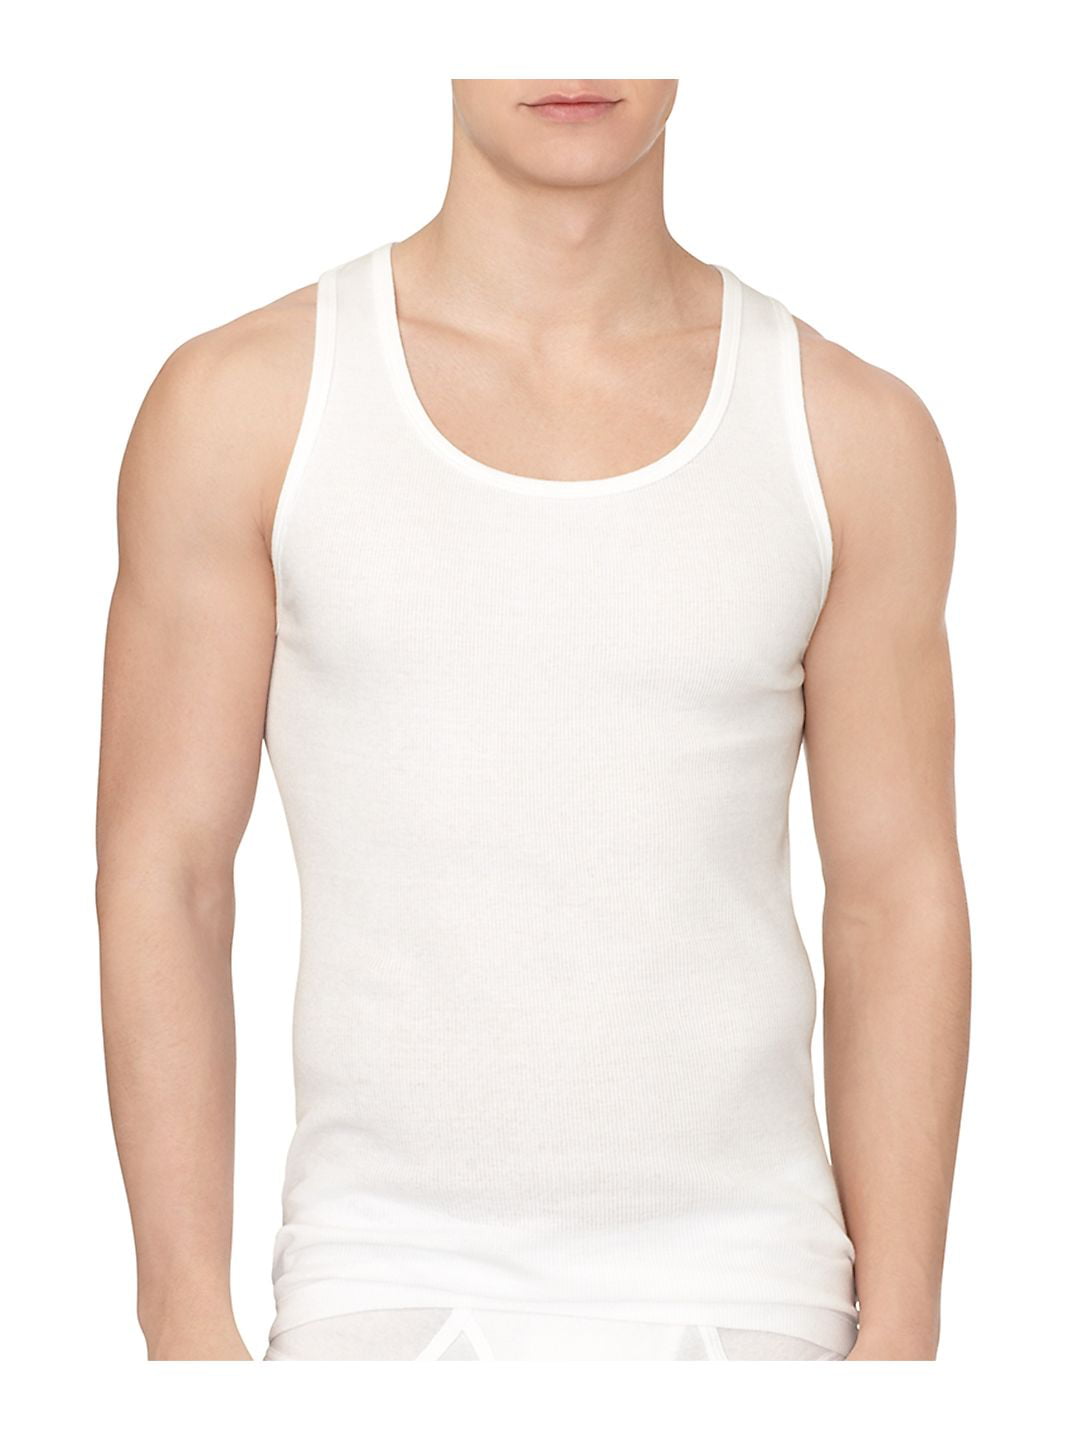 Mens White Ribbed Vest Tops 1 and Multi Pack of 5 Tank Tops Fitted 100% Cotton